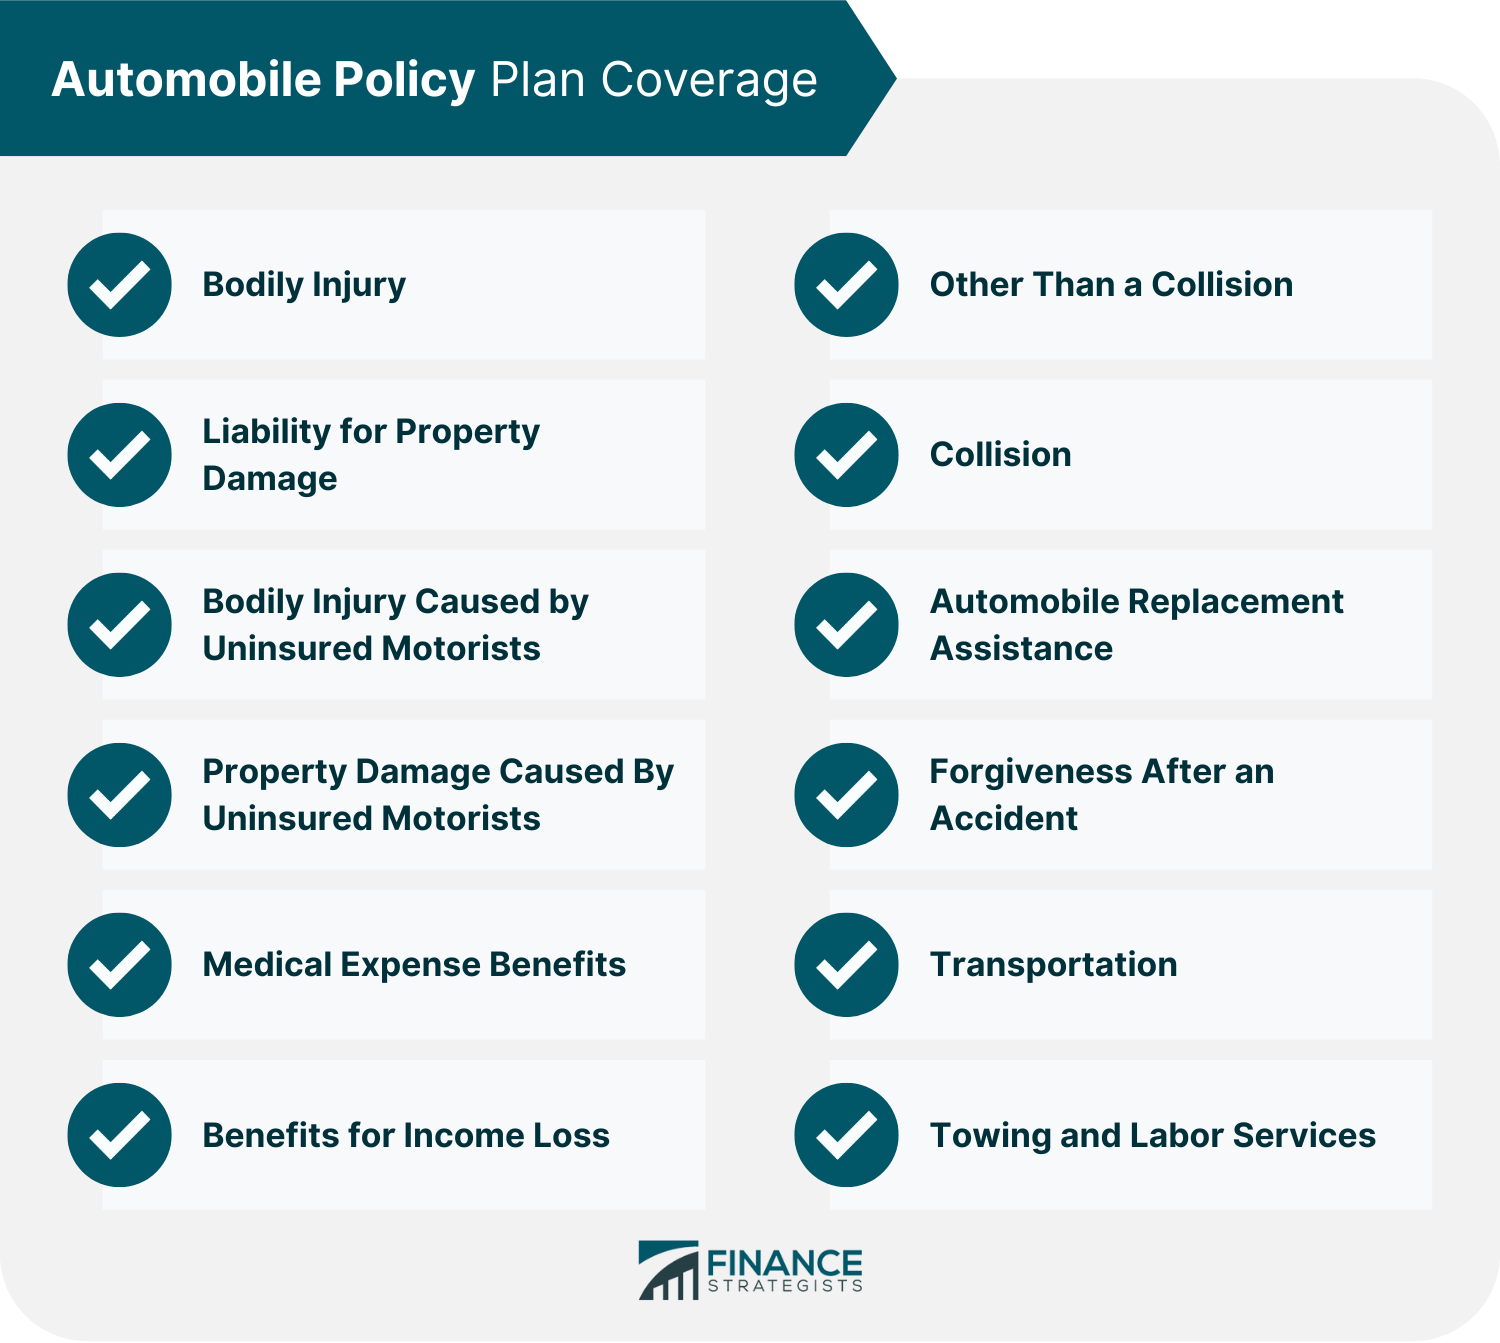 Automobile Policy Plan Coverage